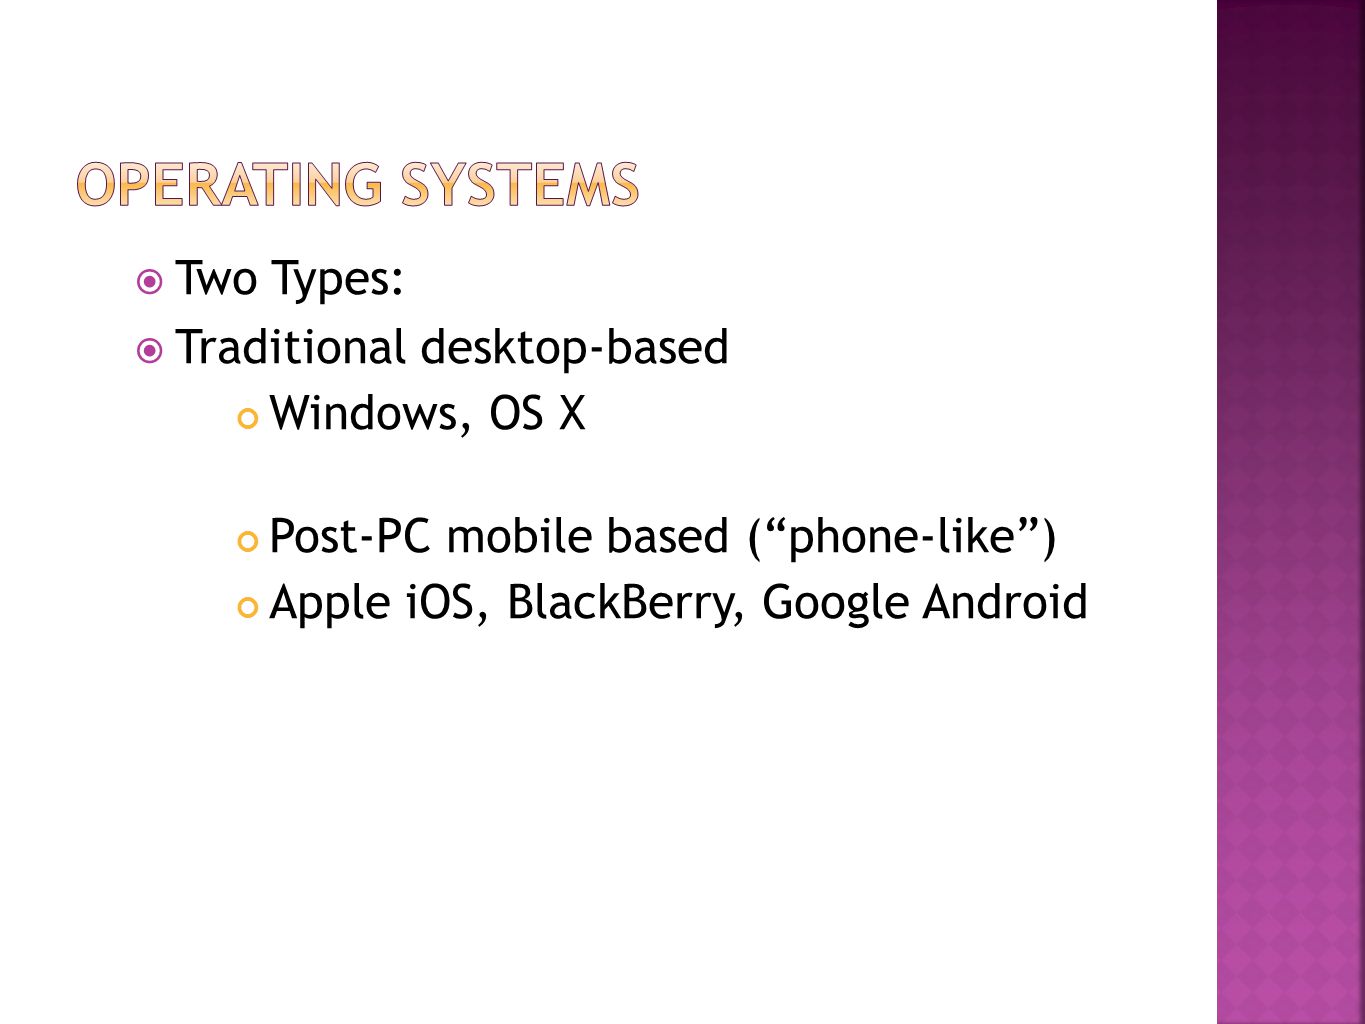  Two Types:  Traditional desktop-based Windows, OS X Post-PC mobile based ( phone-like ) Apple iOS, BlackBerry, Google Android